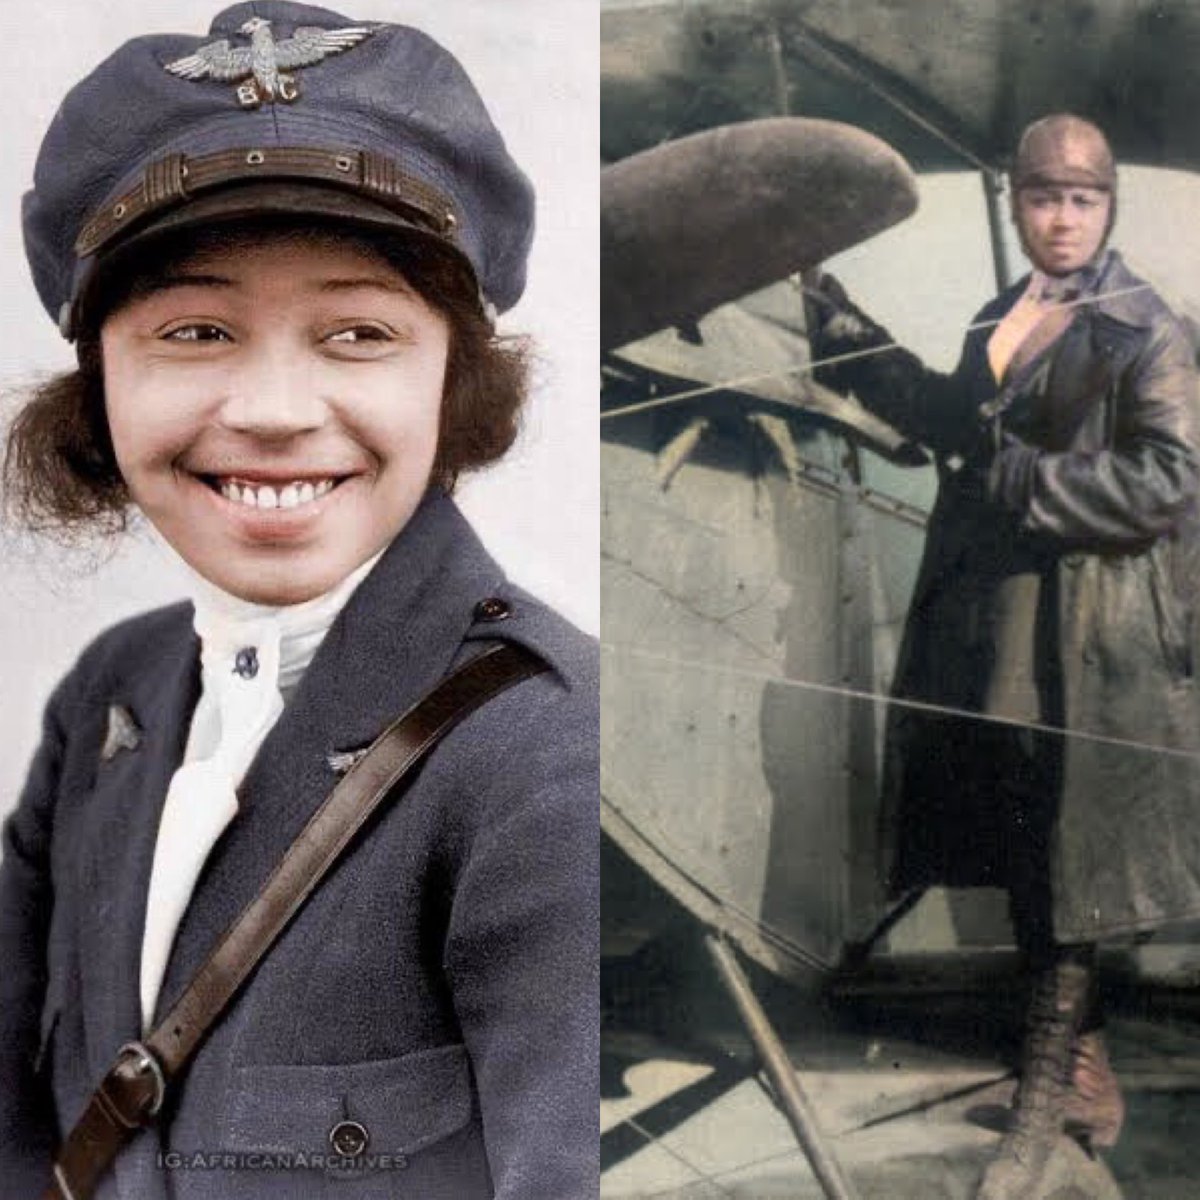 In 1921, Bessie Coleman received her pilot's license becoming the first black licensed pilot. Women and people of color had no training opportunities in the US so she learnt French and moved to Paris to earn her license. Black Pilots Who Broke Barriers: A THREAD